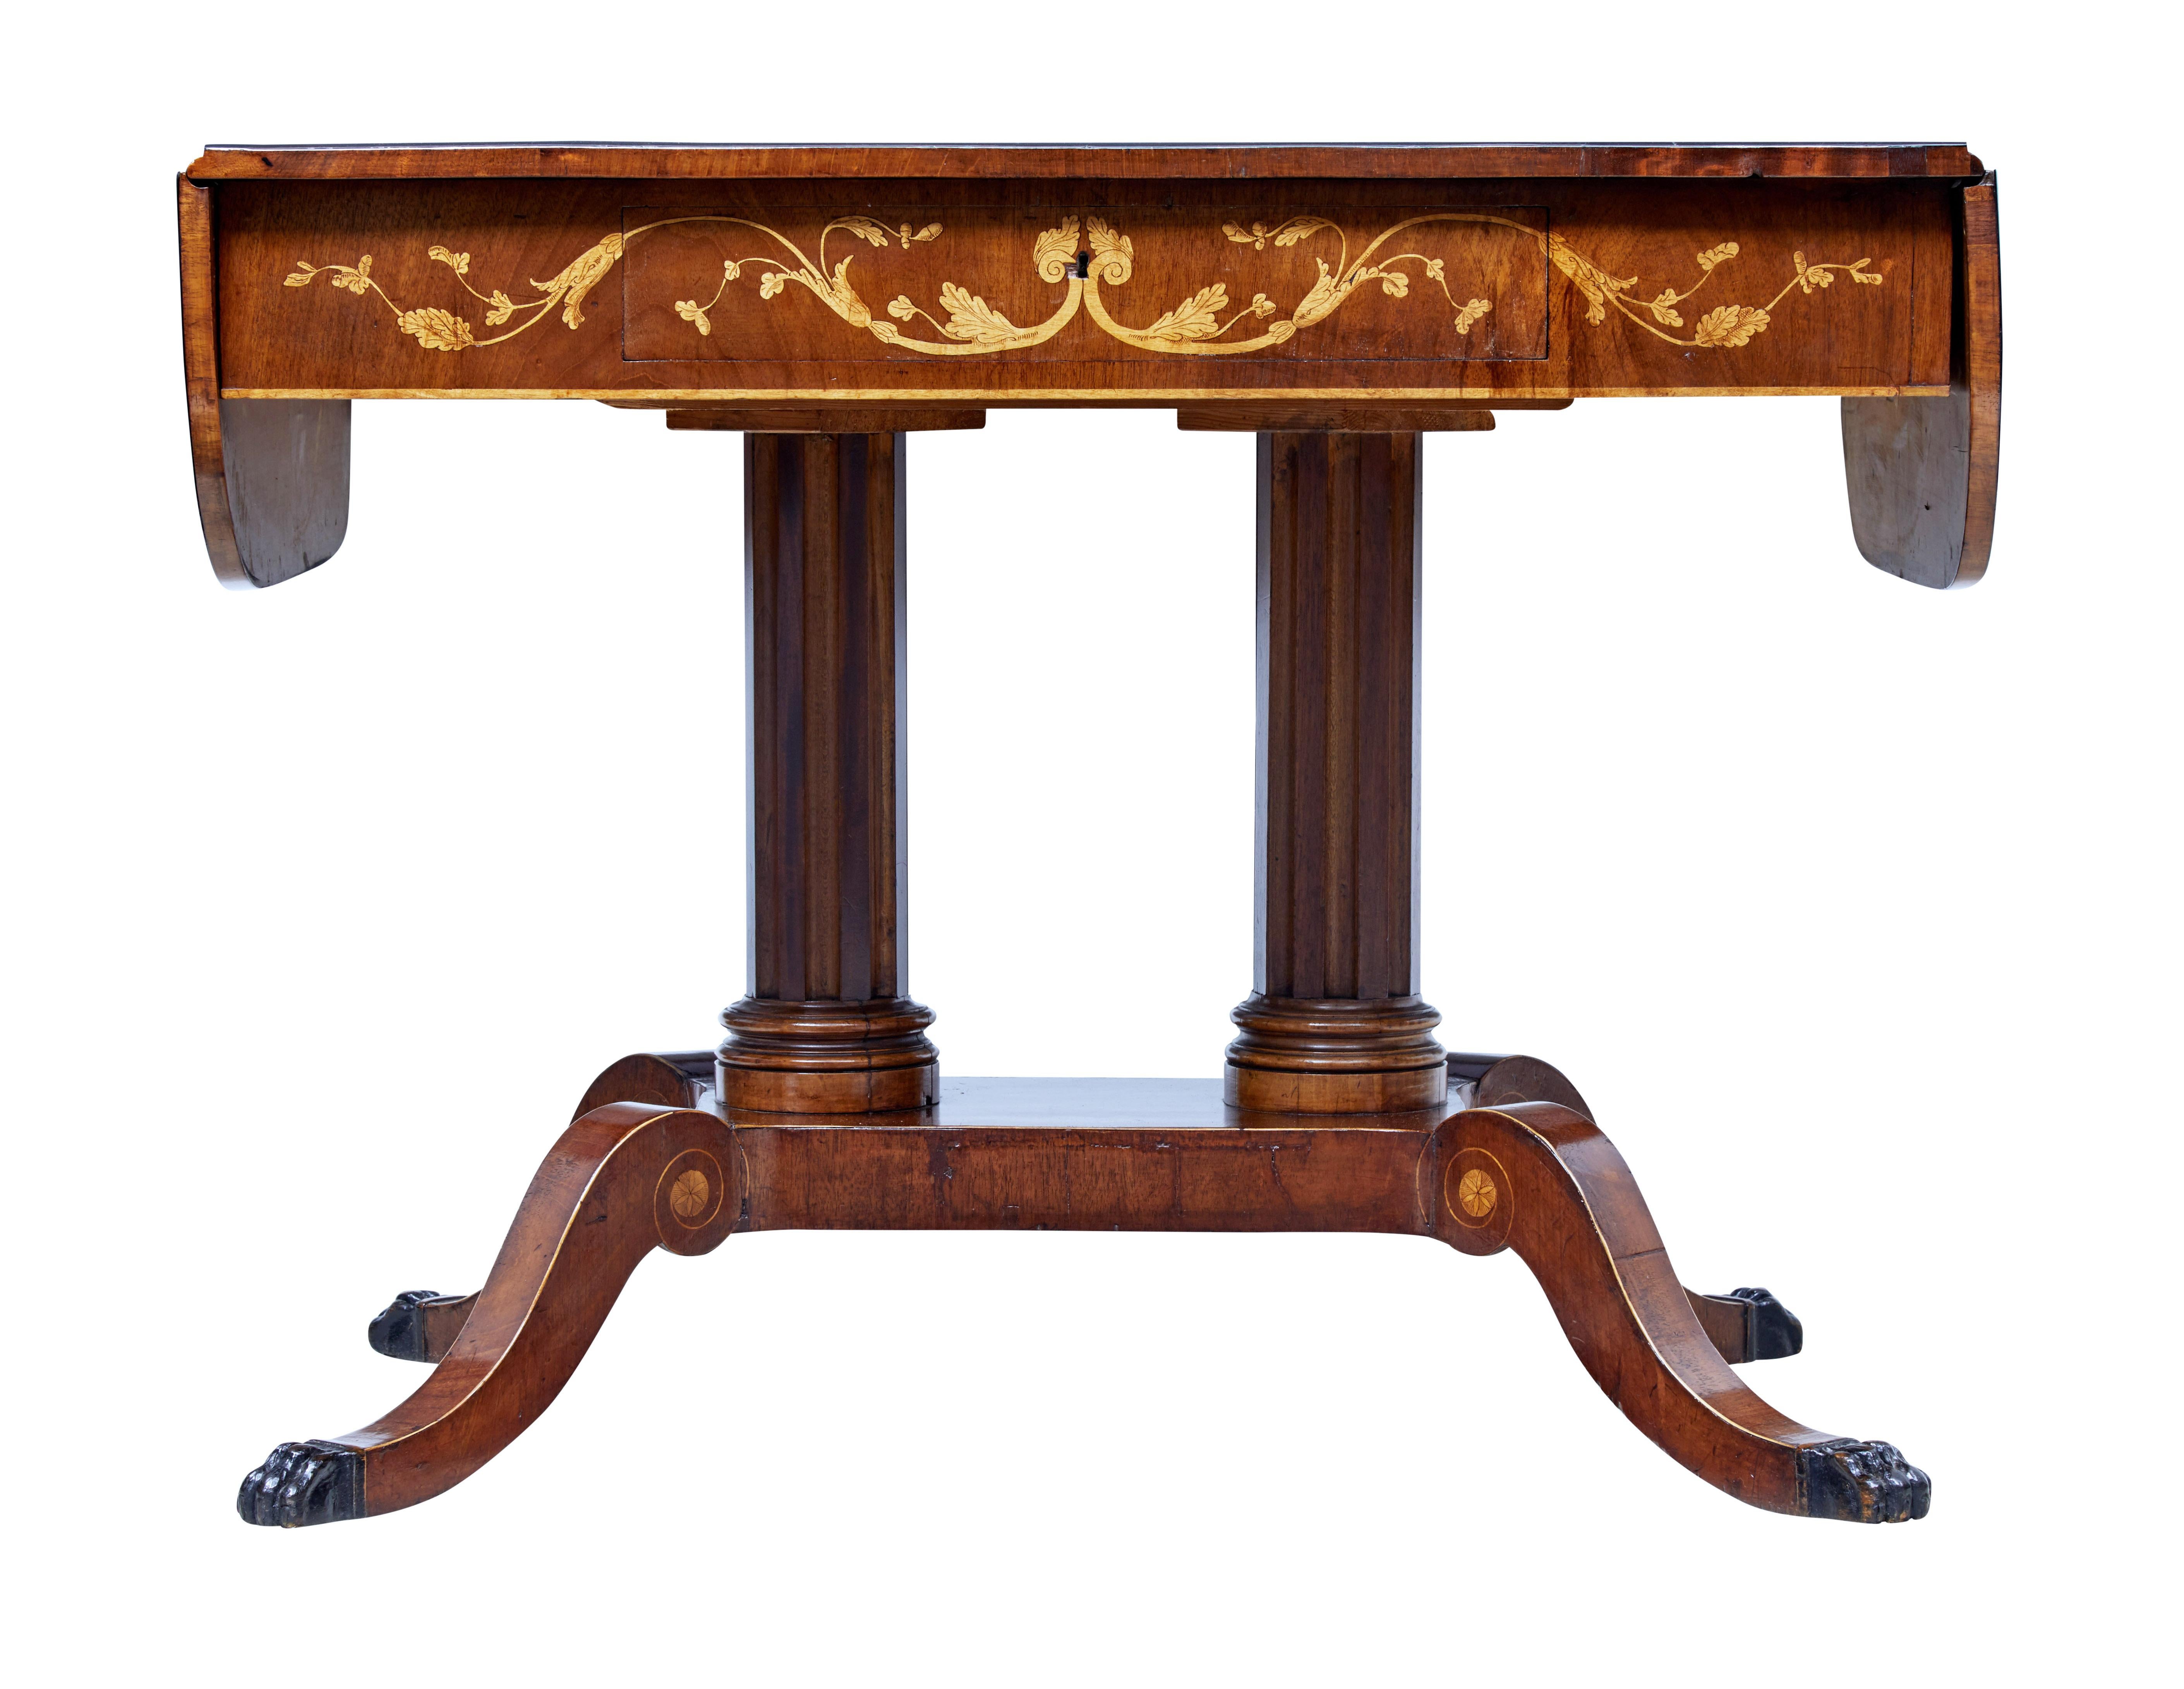 19th century Swedish mahogany inlaid sofa table, circa 1860.

Free standing sofa table with drop down flaps. Plain mahogany top with ebonised outer edge. Single drawer to the front with birch swag inlay, which is repeated on the